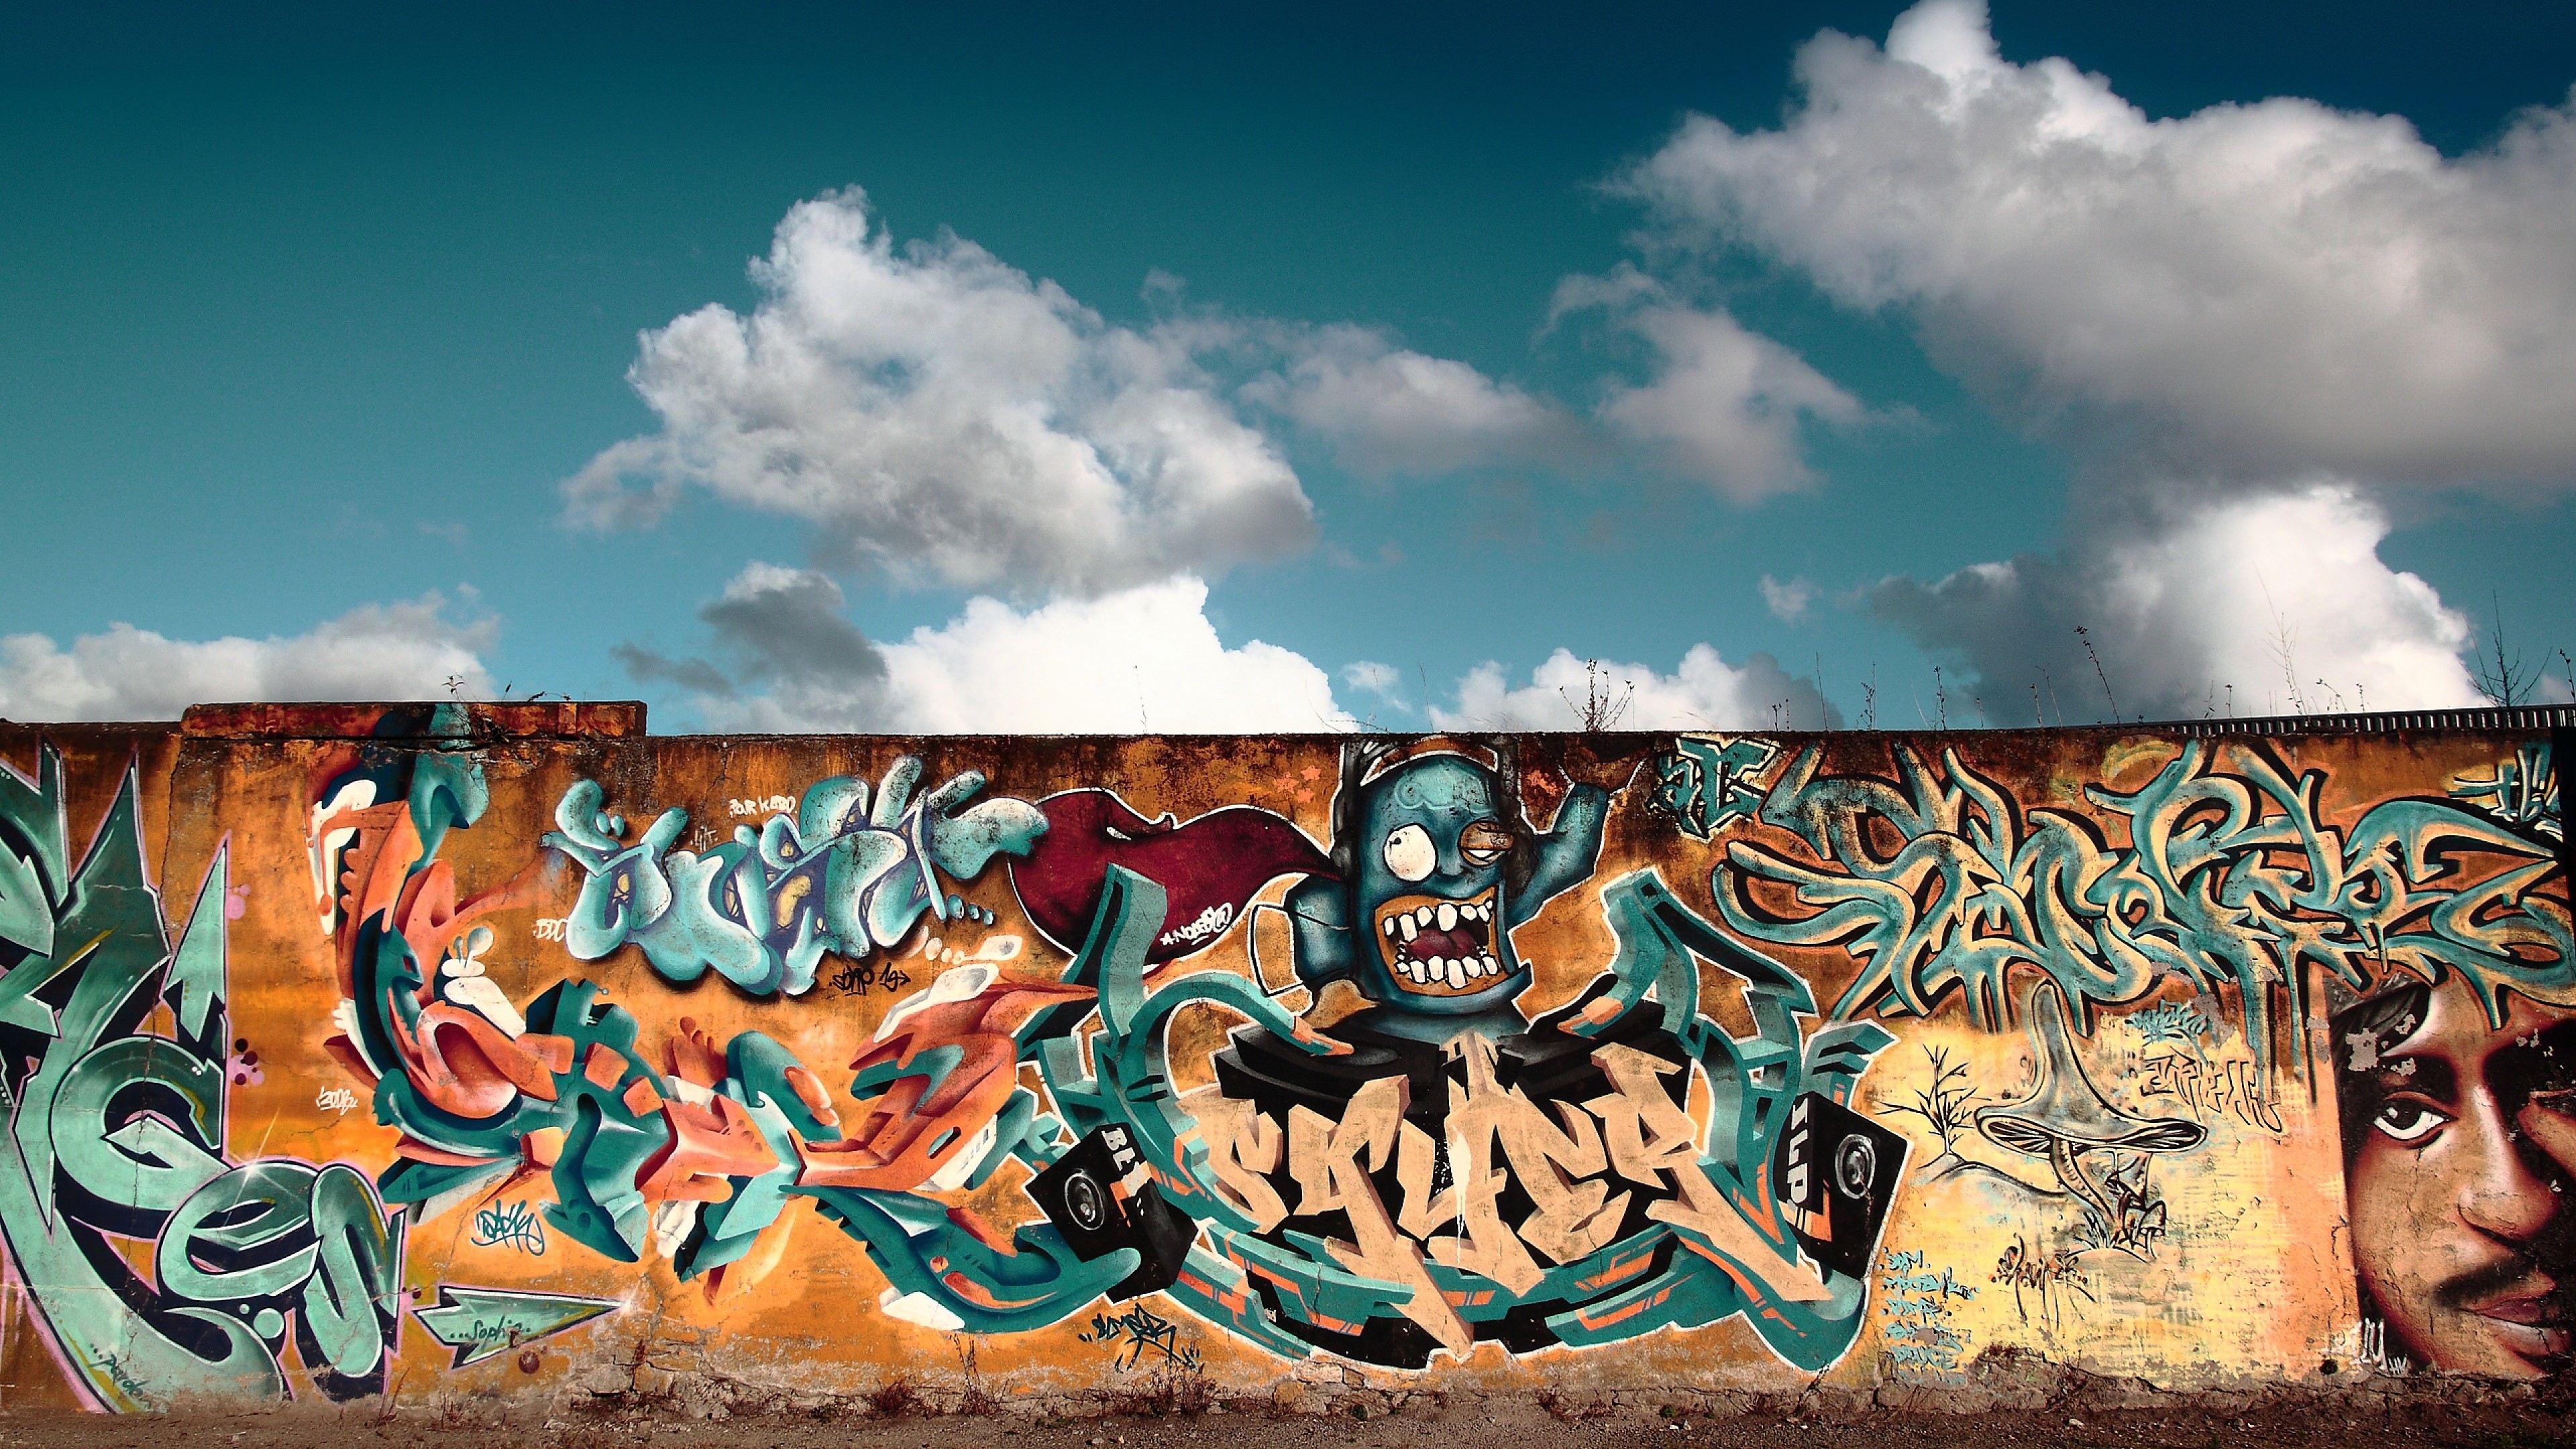 3840x2160 graffiti wallpaper city colorful full hd hd wallpapers cool images free  high definition amazing colourful desktop wallpapers samsung phone  wallpapers ...